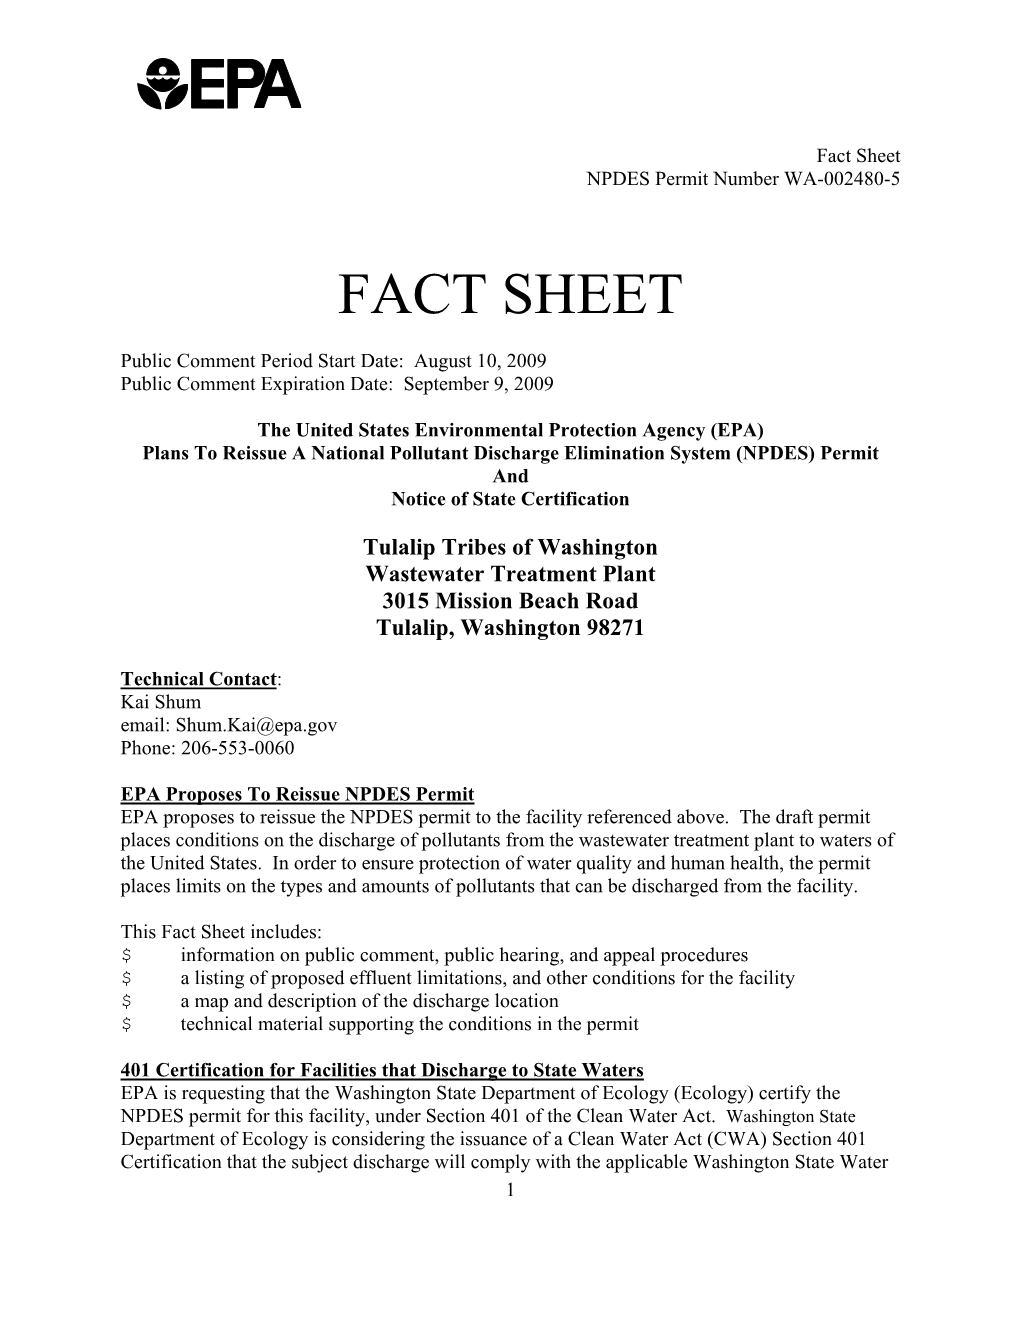 Fact Sheet for the Draft NPDES Permit for Tulalip Tribes Wastewater